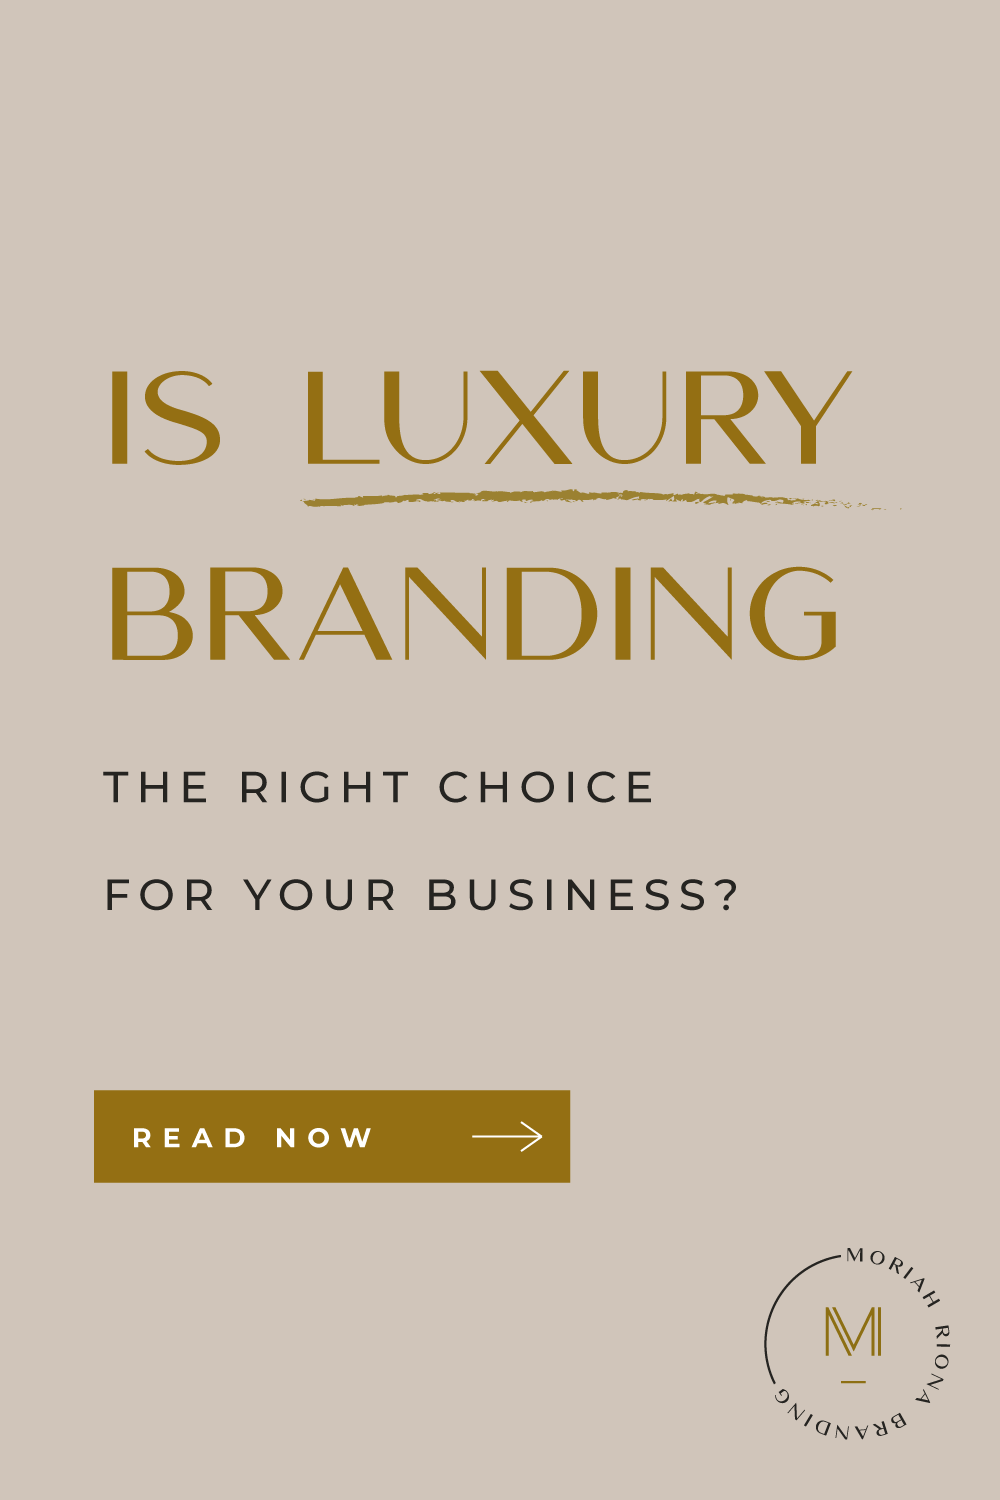 Are you wondering if building a luxury brand identity is the right move for your business? This blog post is for you! I’ll answer the question, “What is luxury branding?” and you’ll learn why a luxury branding strategy isn’t for everyone. #luxurybrand #entrepreneurship #lifecoach #brandingtips